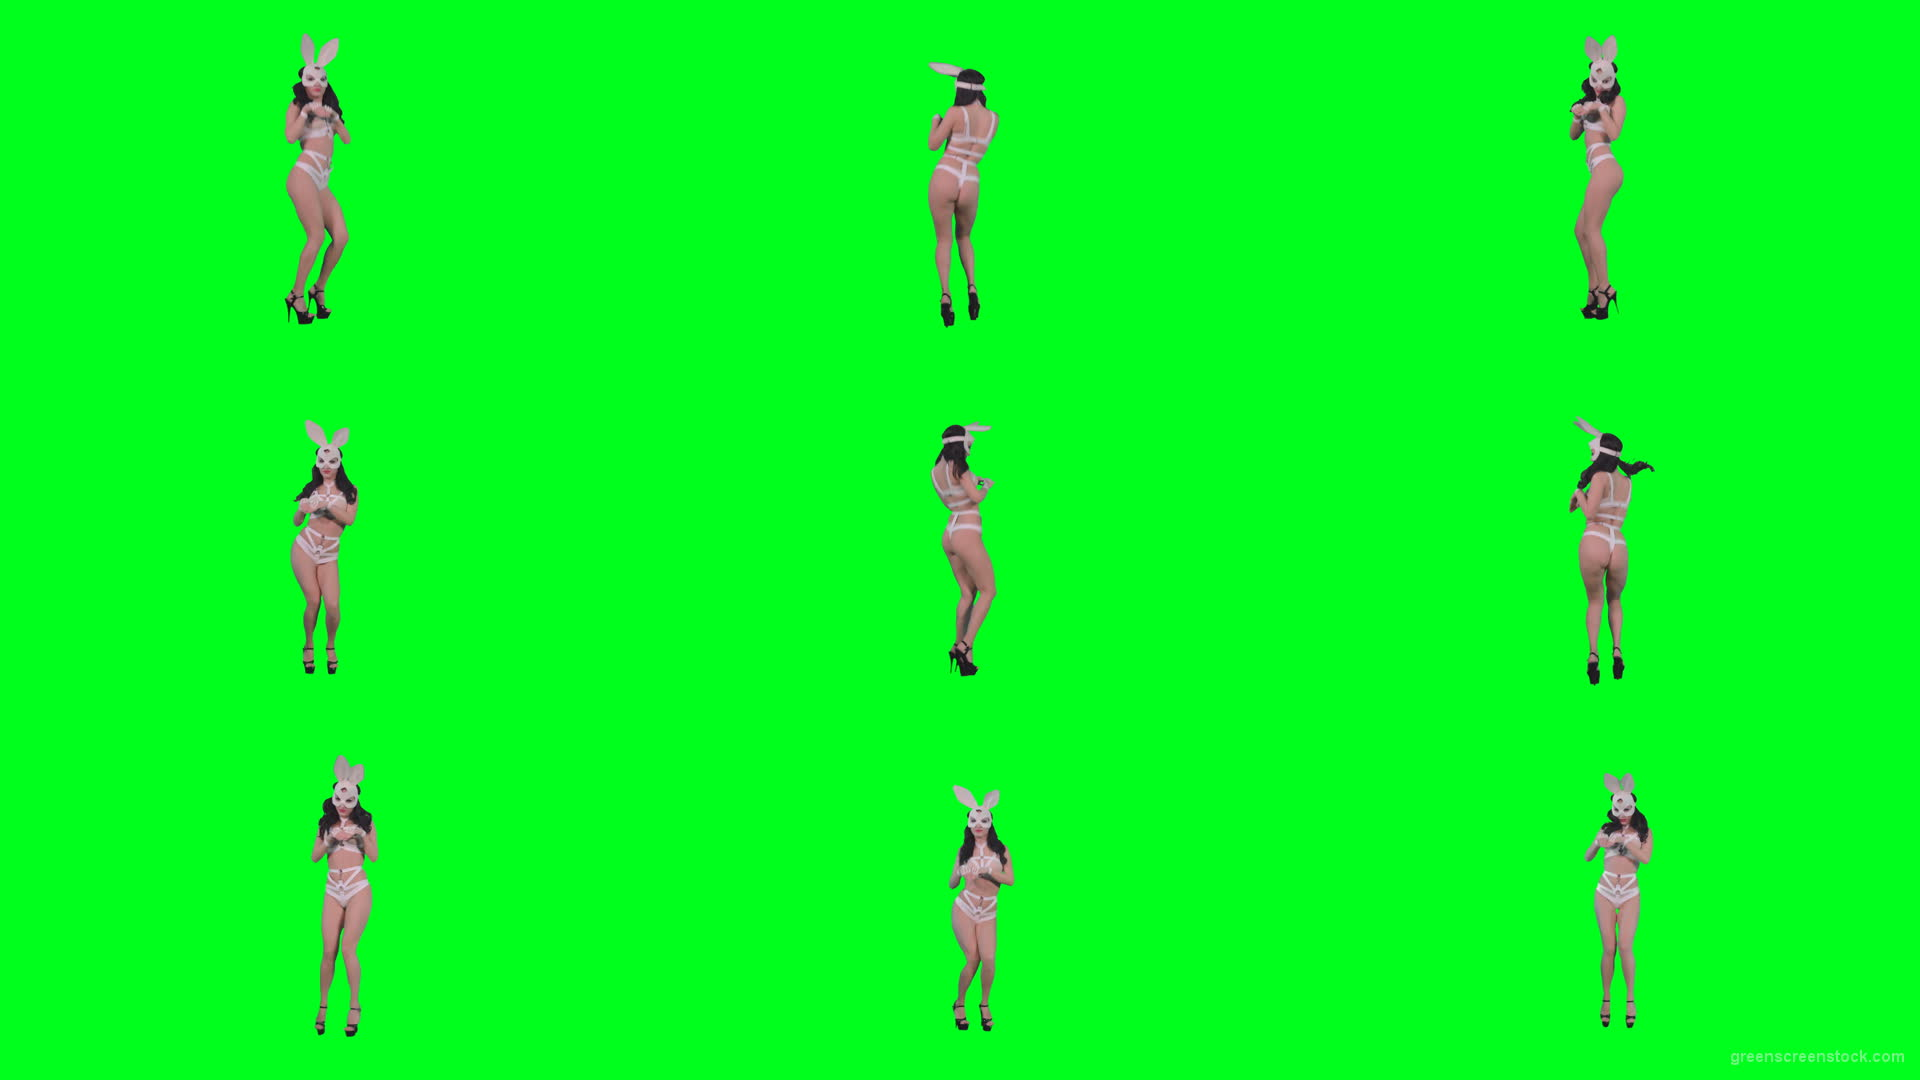 Young-girl-in-rabbit-costume-jumping-and-spinning-on-green-screen-4K-Video-Footage-1920 Green Screen Stock